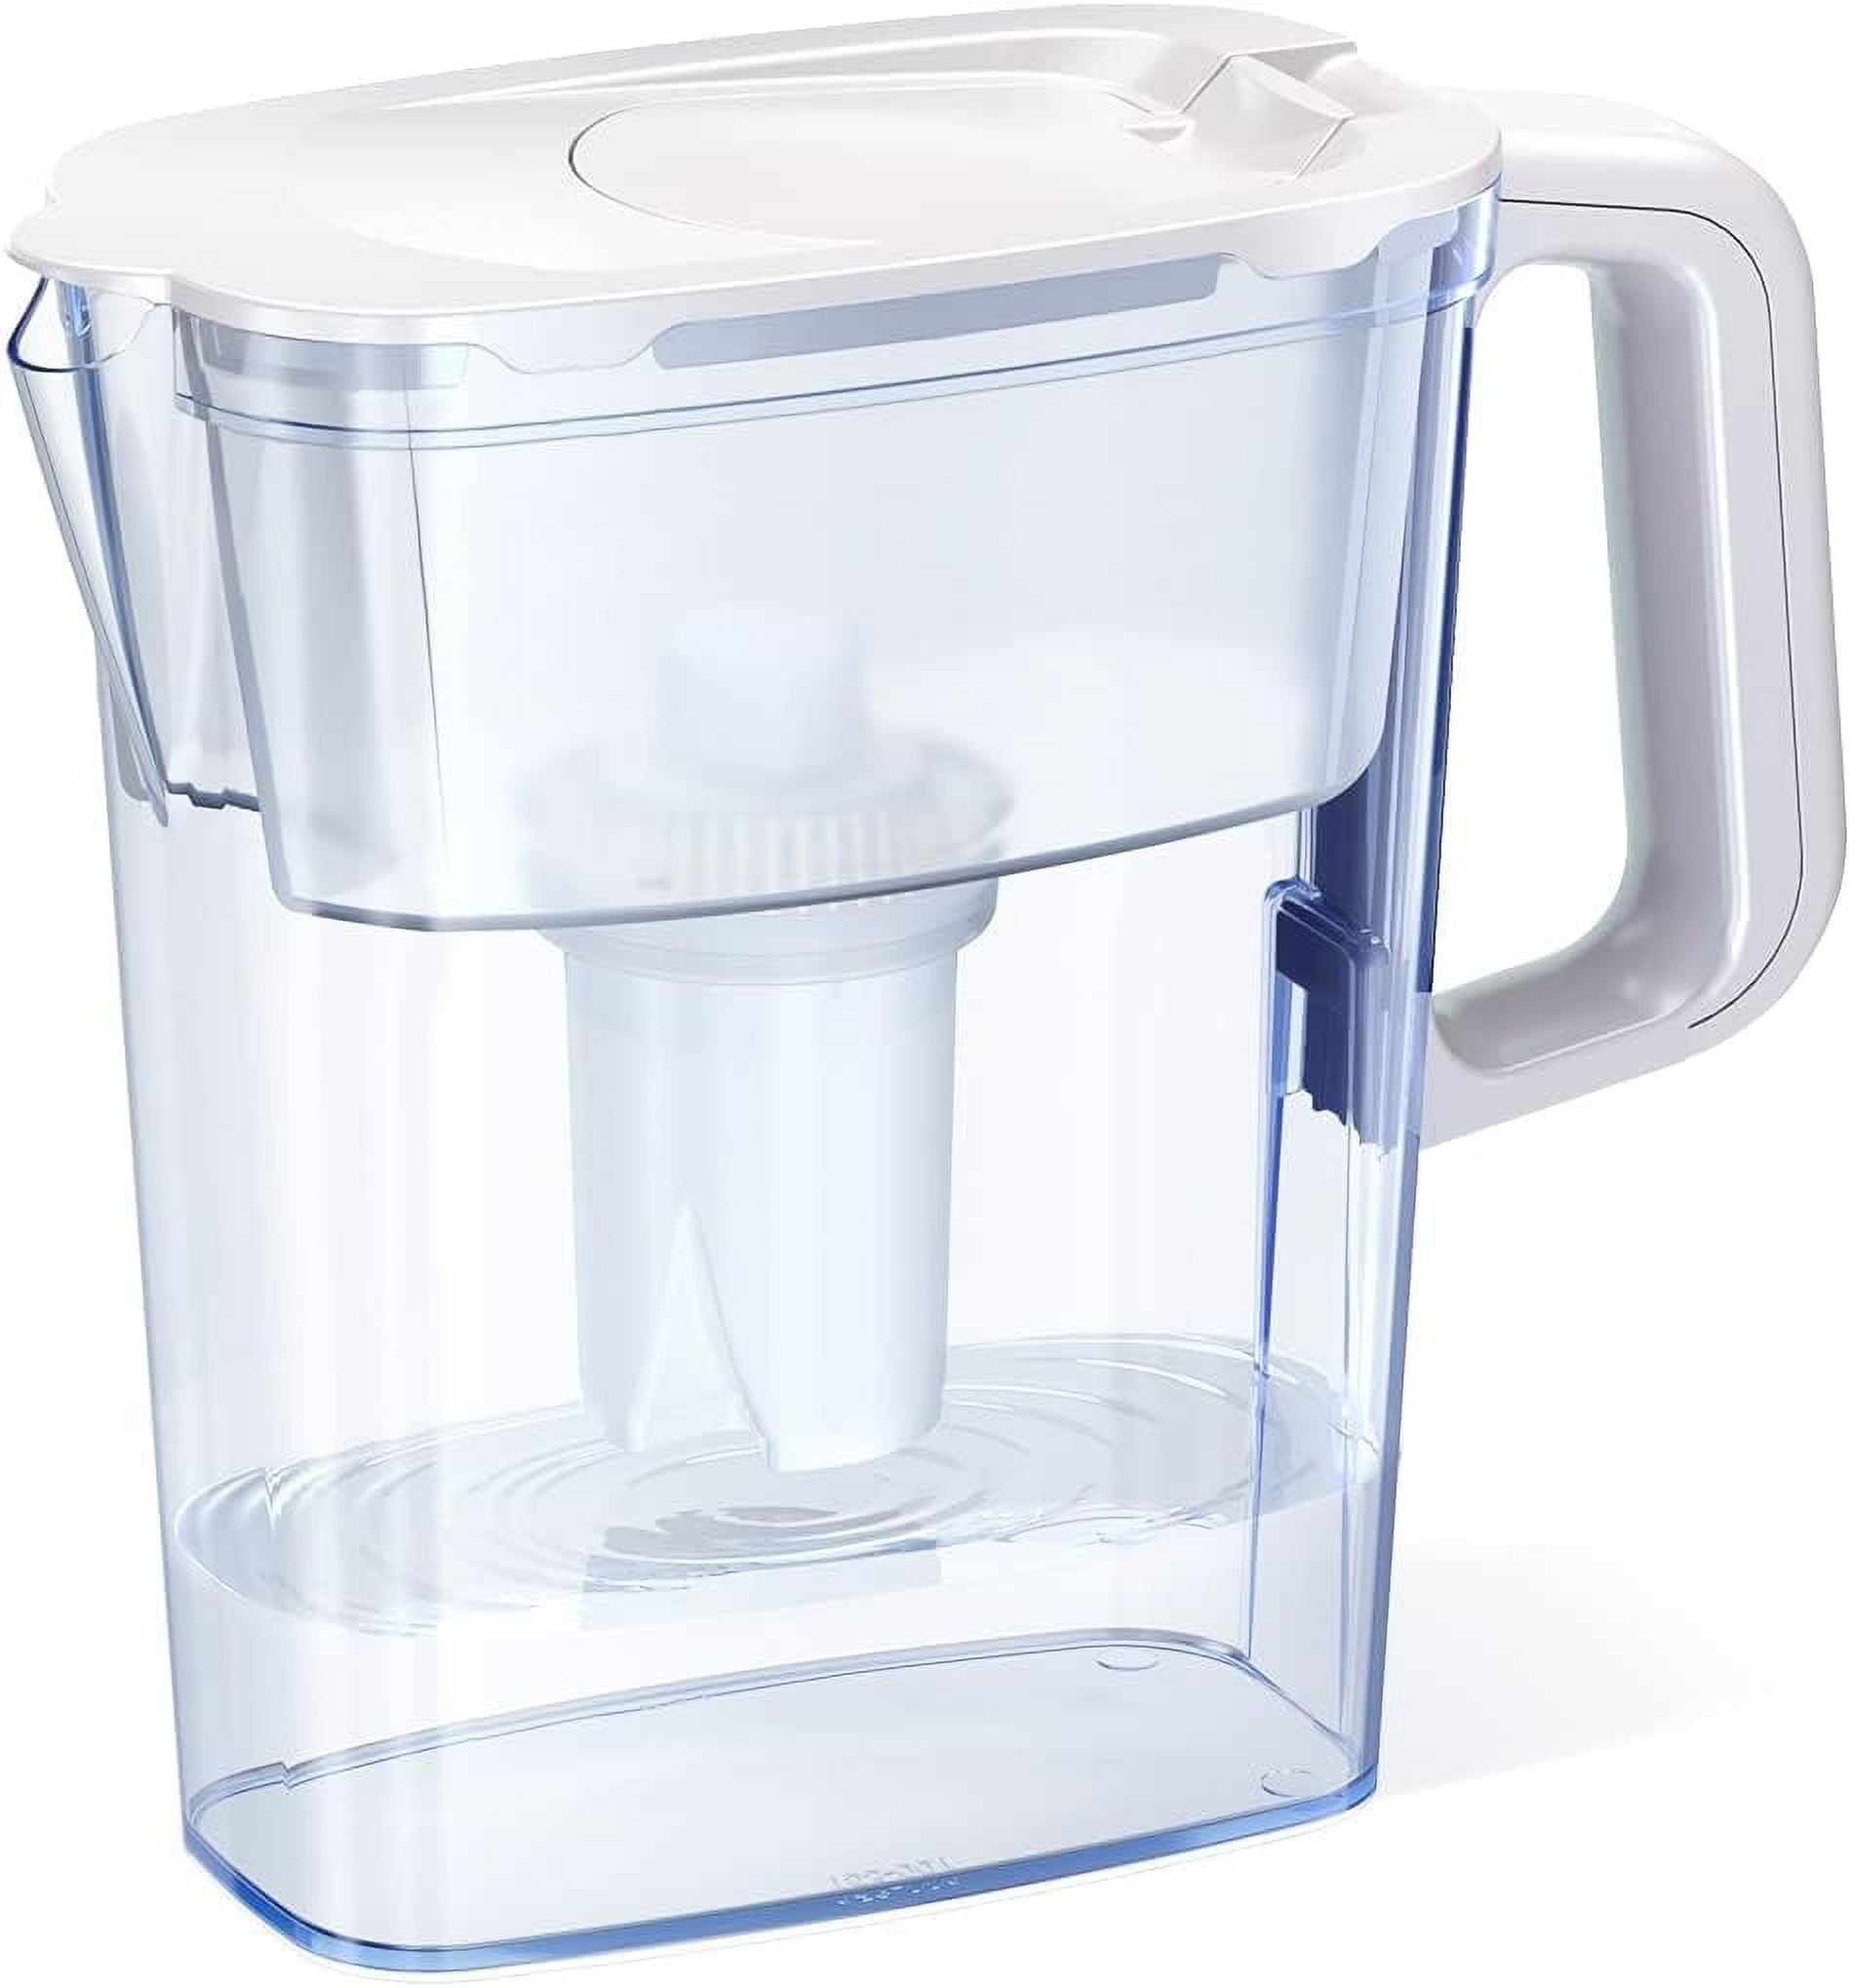 AQUAPHOR Compact 5-Cup Water Filter Pitcher - White with 1 x B15 Filter ...